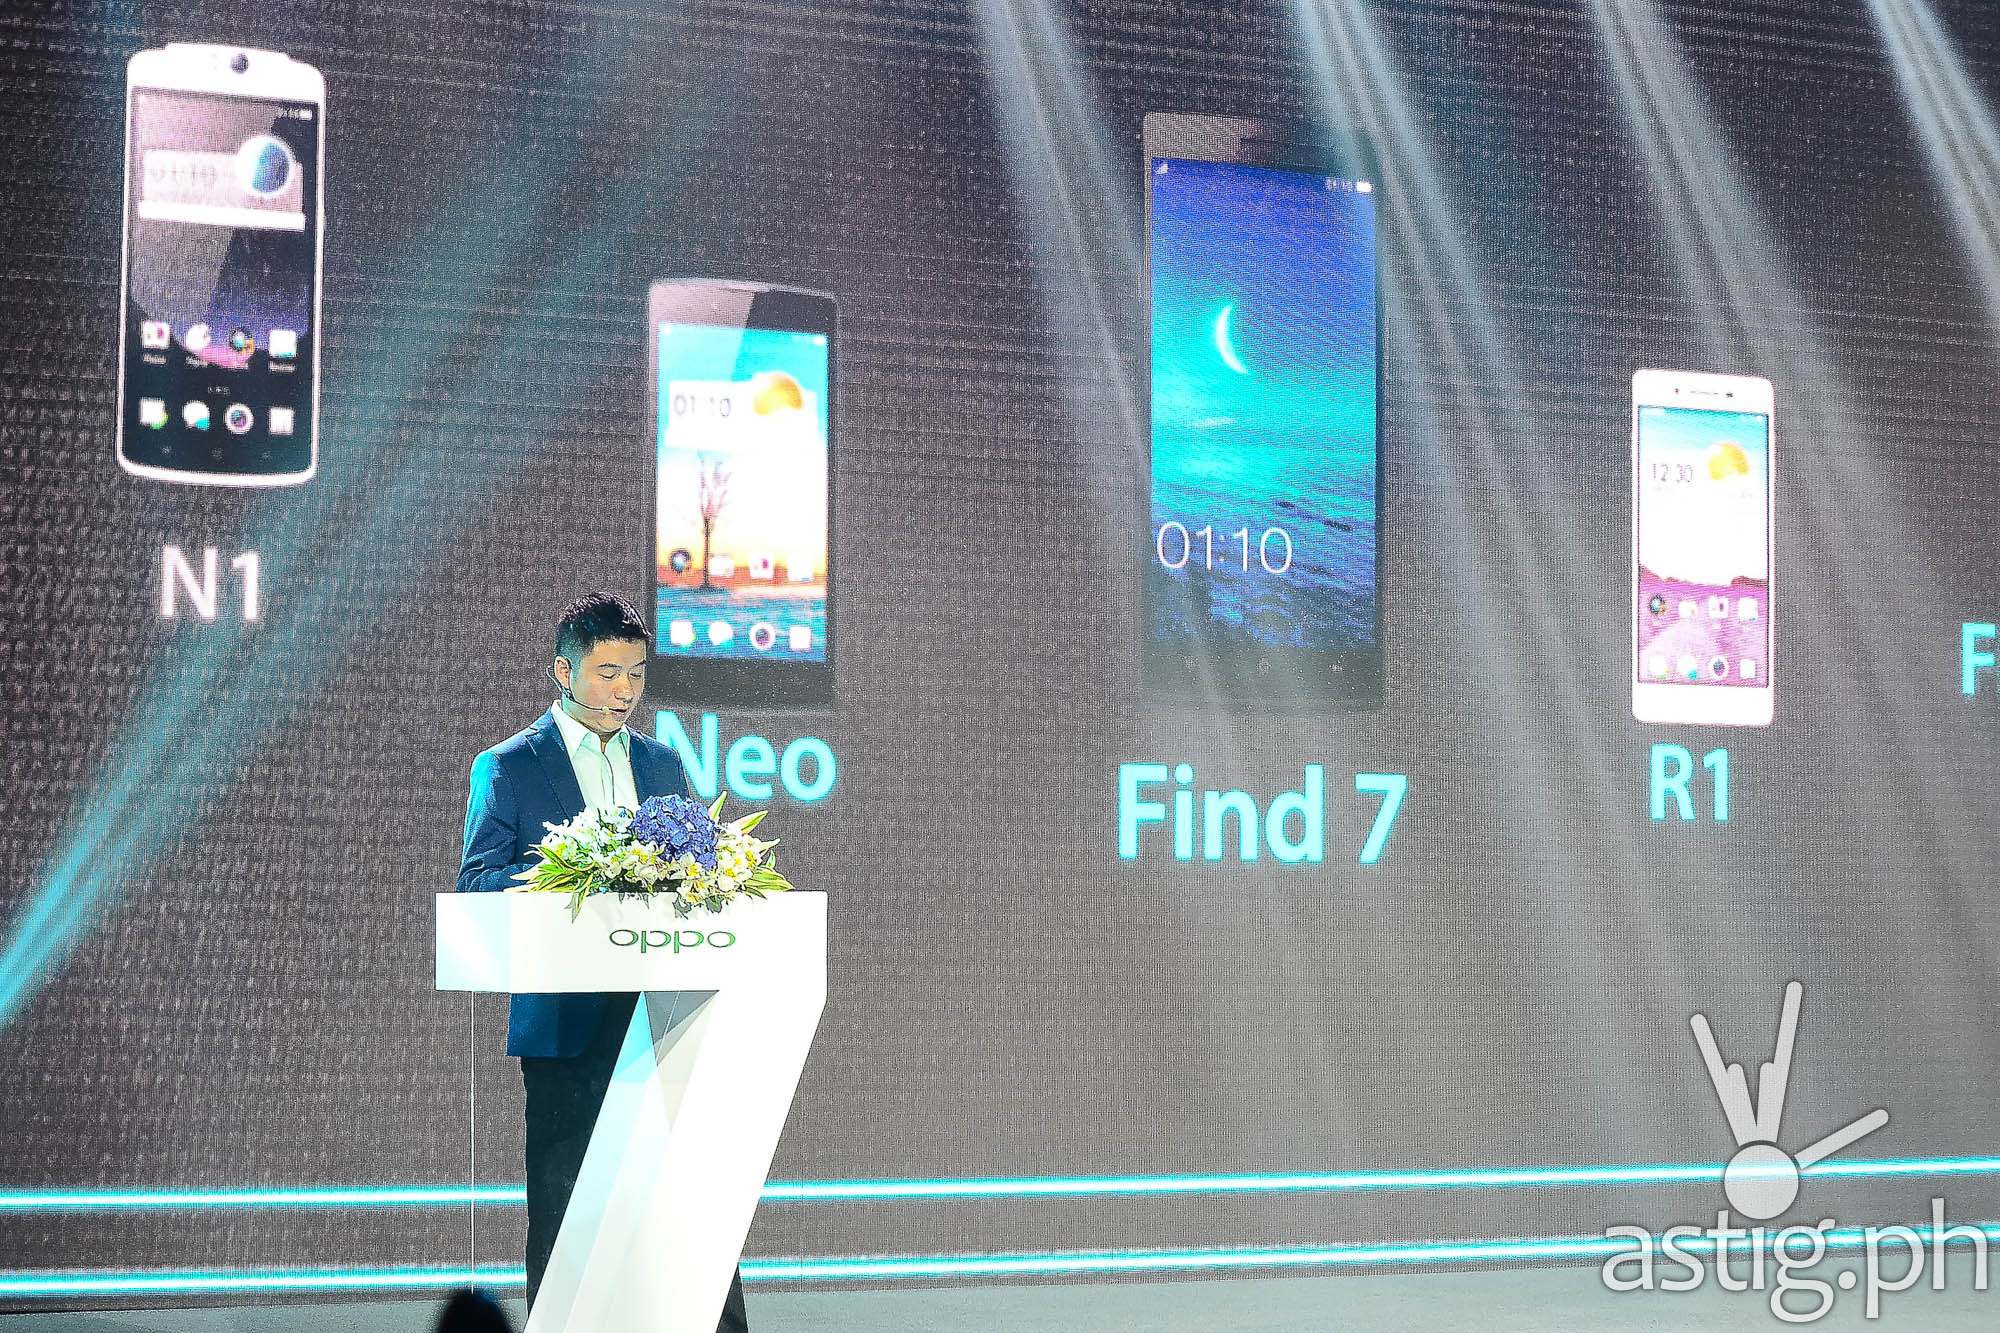 OPPO Philippines CEO James Ma a the Find 7 launch